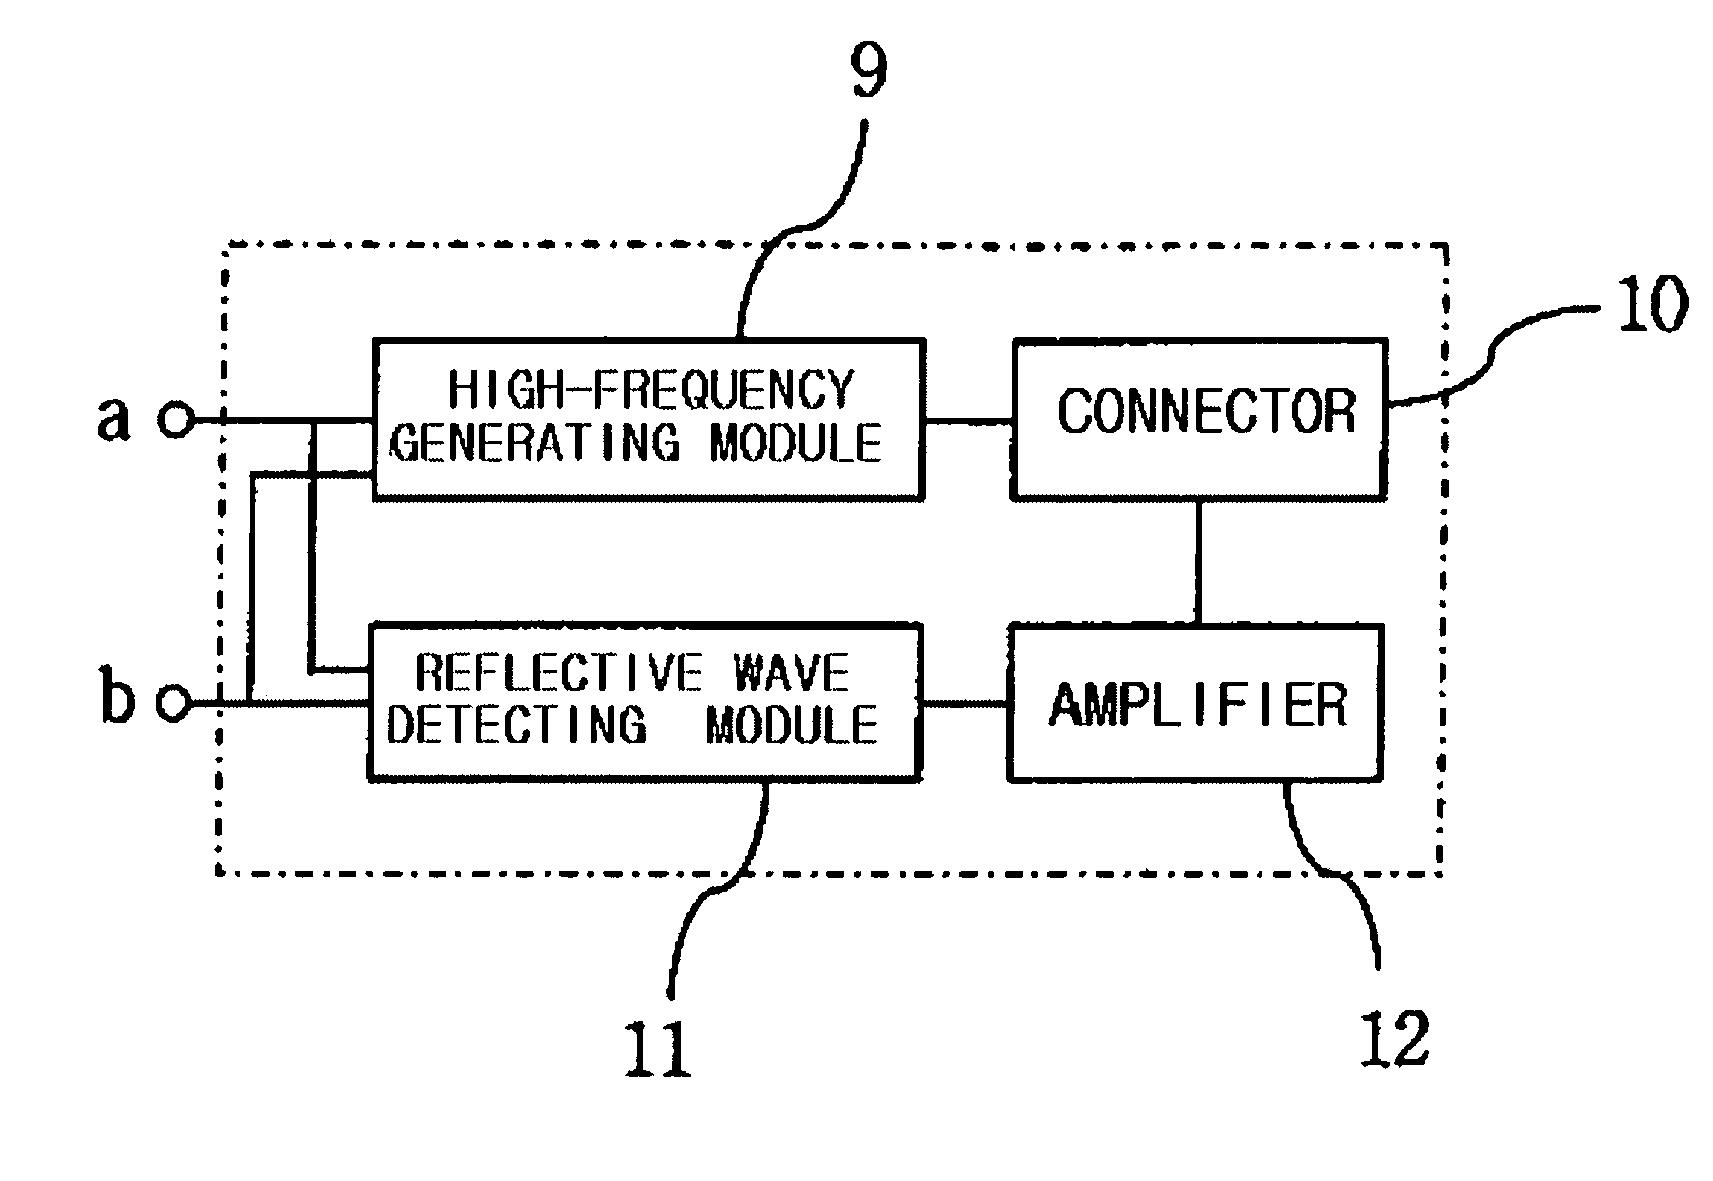 Apparatus and method for measuring the amount of fuel in a vehicle using transmission lines